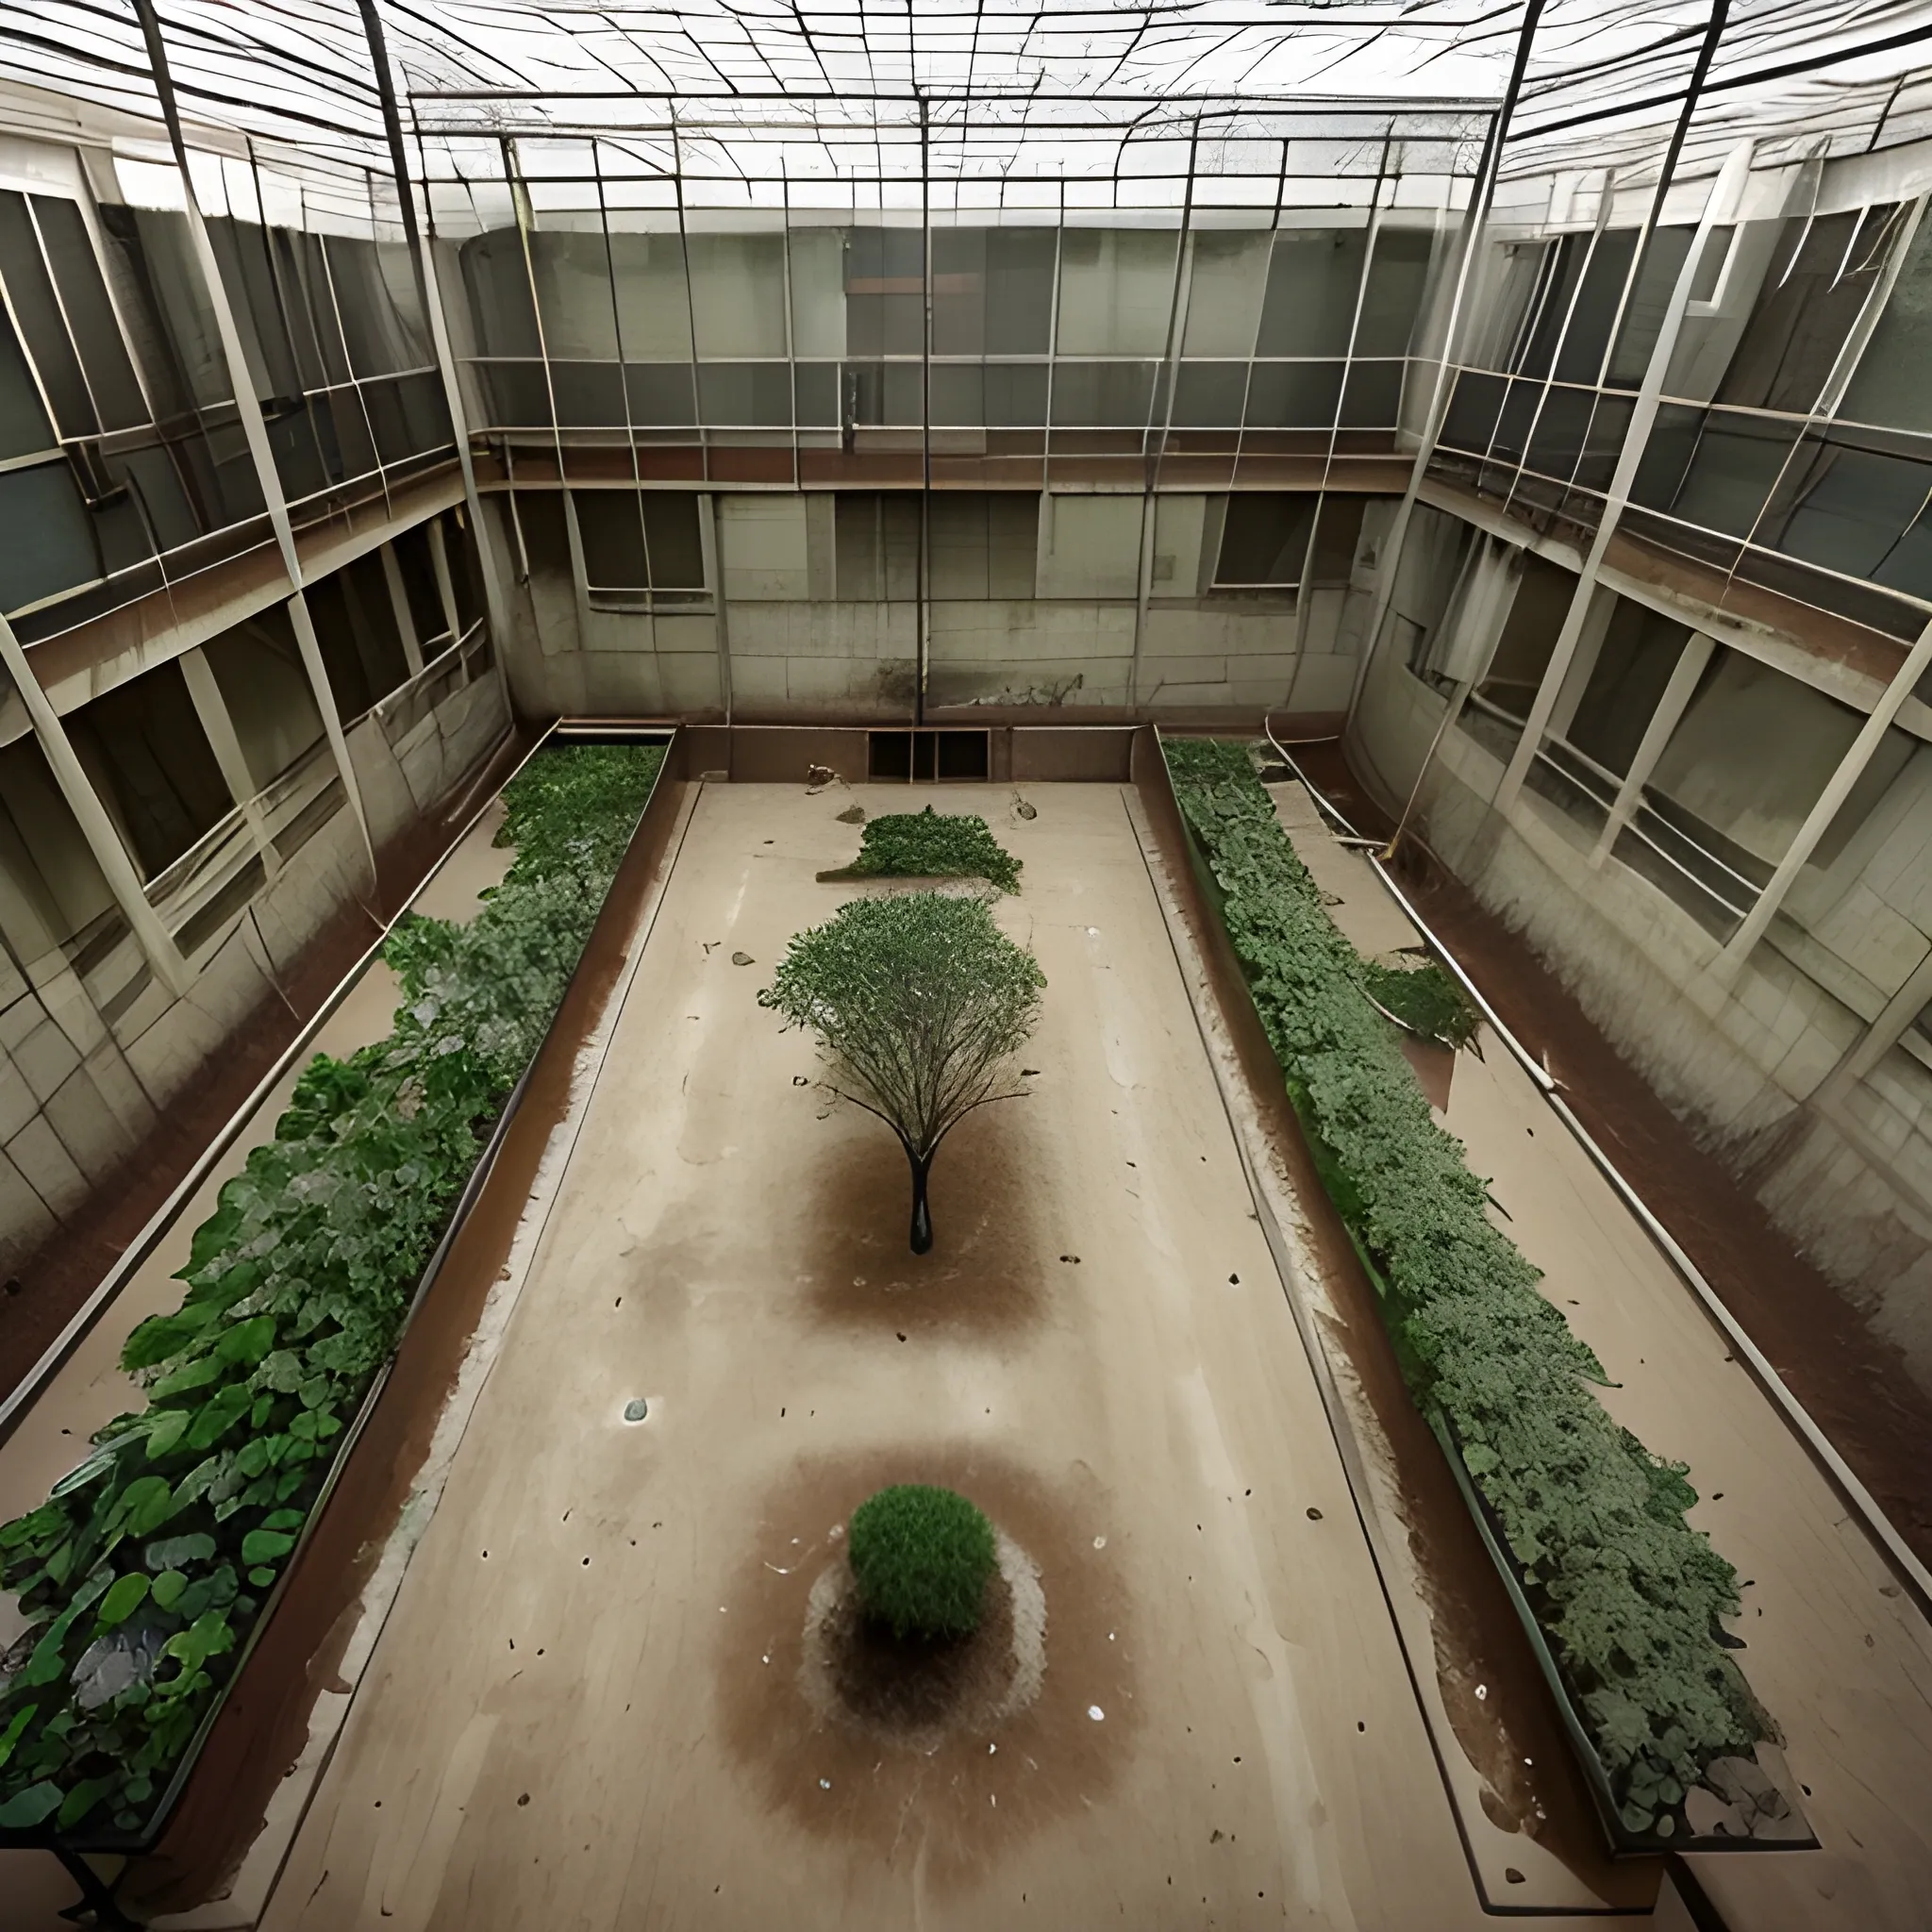 plants and trees dying underground in prison not enough sunlight filtering down from above

